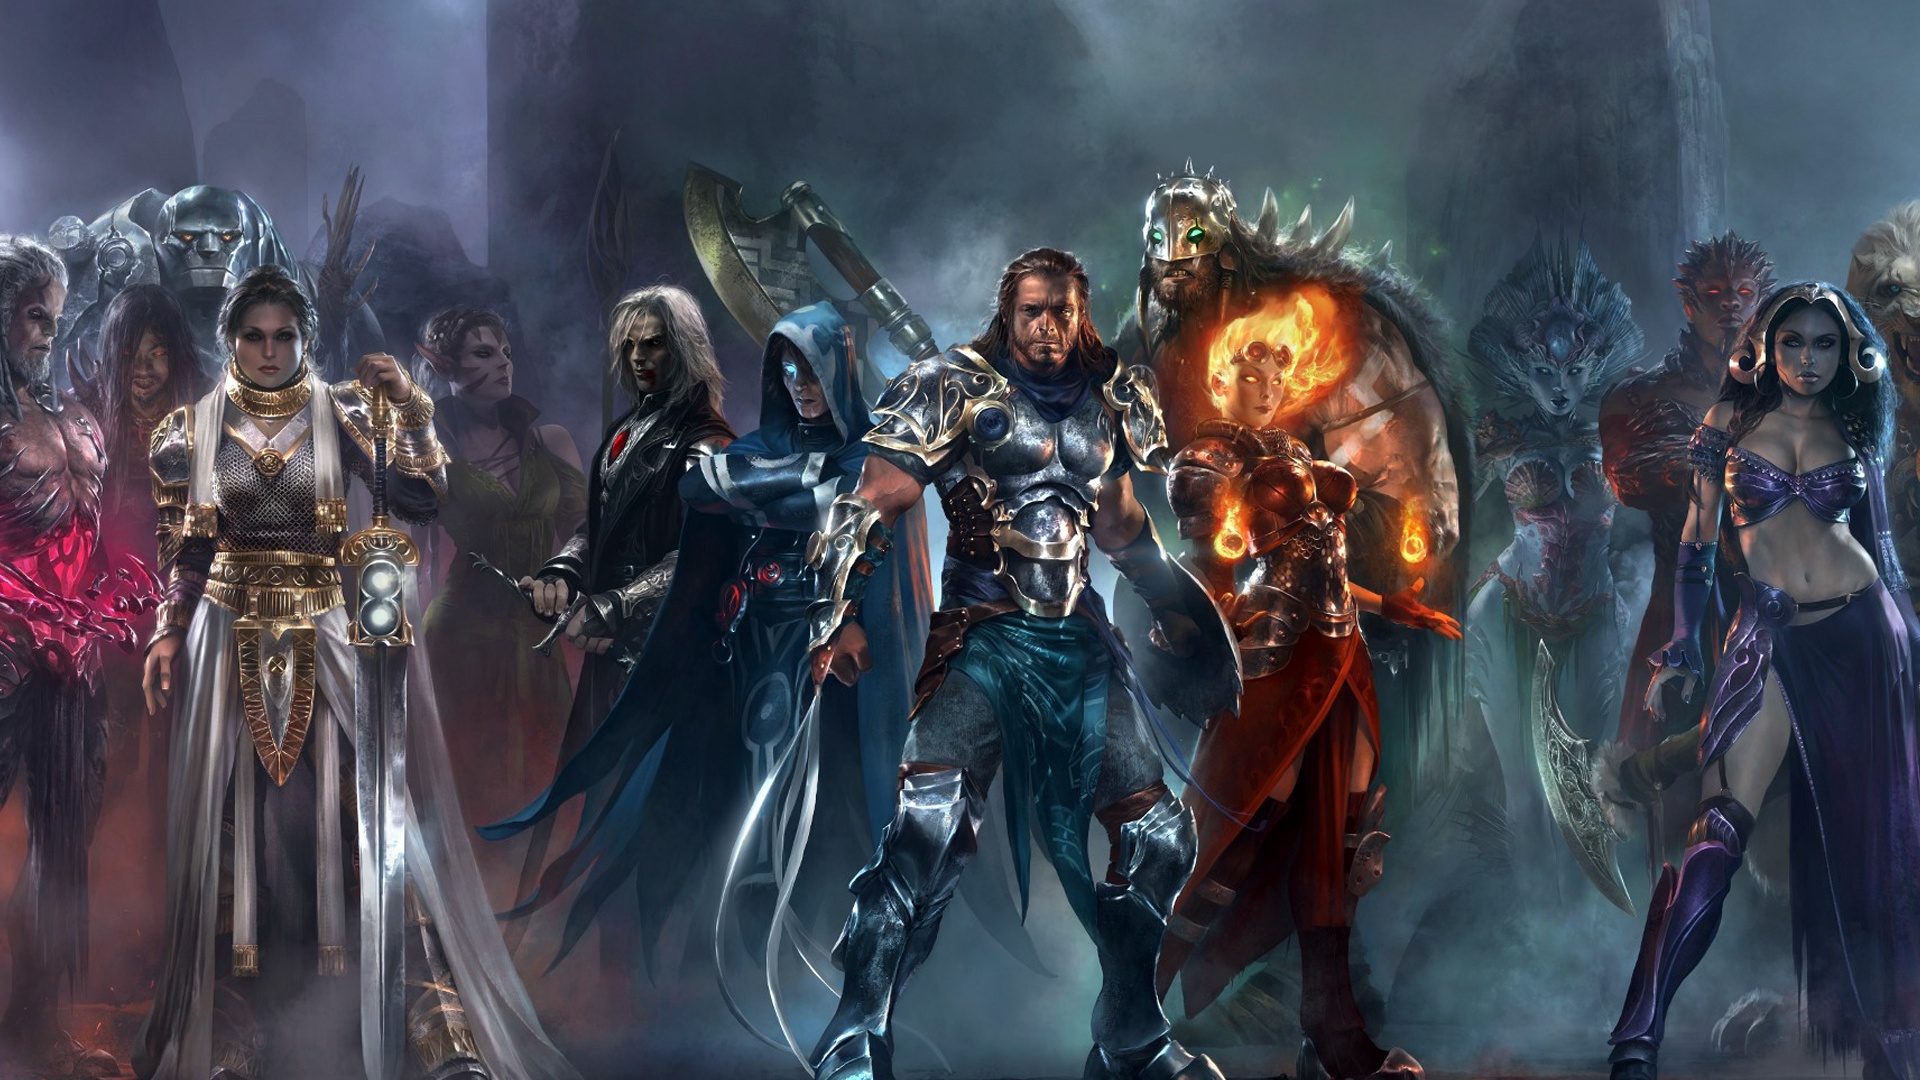 Wallpaper Magic The Gathering Duels Of Planeswalkers